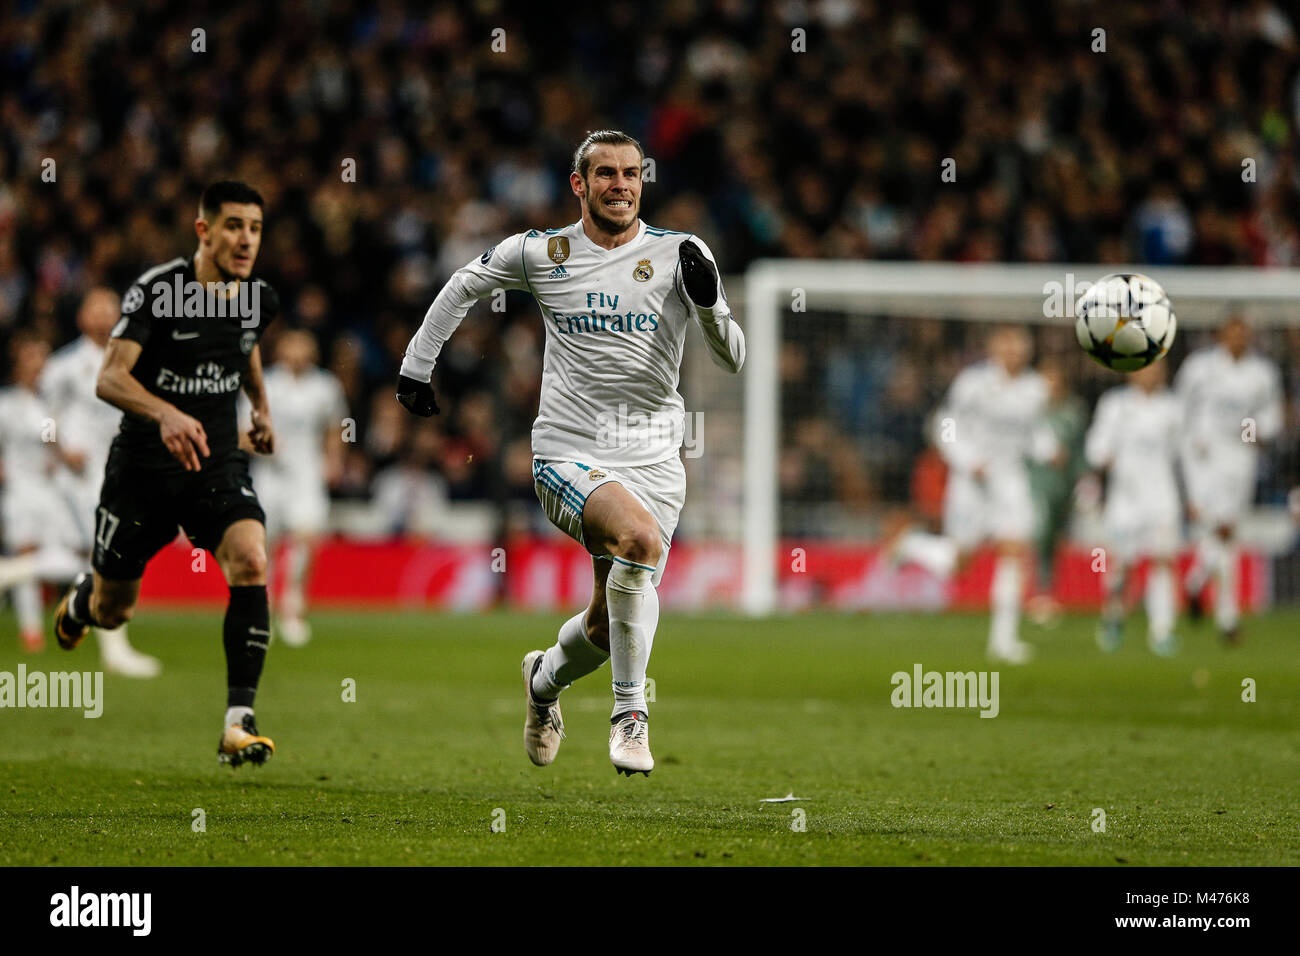 Gareth Bale (Real Madrid) drives forward on the ball Yuri Berchiche (PSG), UCL Champions League match between Real Madrid vs PSG at the Santiago Bernabeu stadium in Madrid, Spain, February 14, 2018. Credit: Gtres Información más Comuniación on line, S.L./Alamy Live News Stock Photo